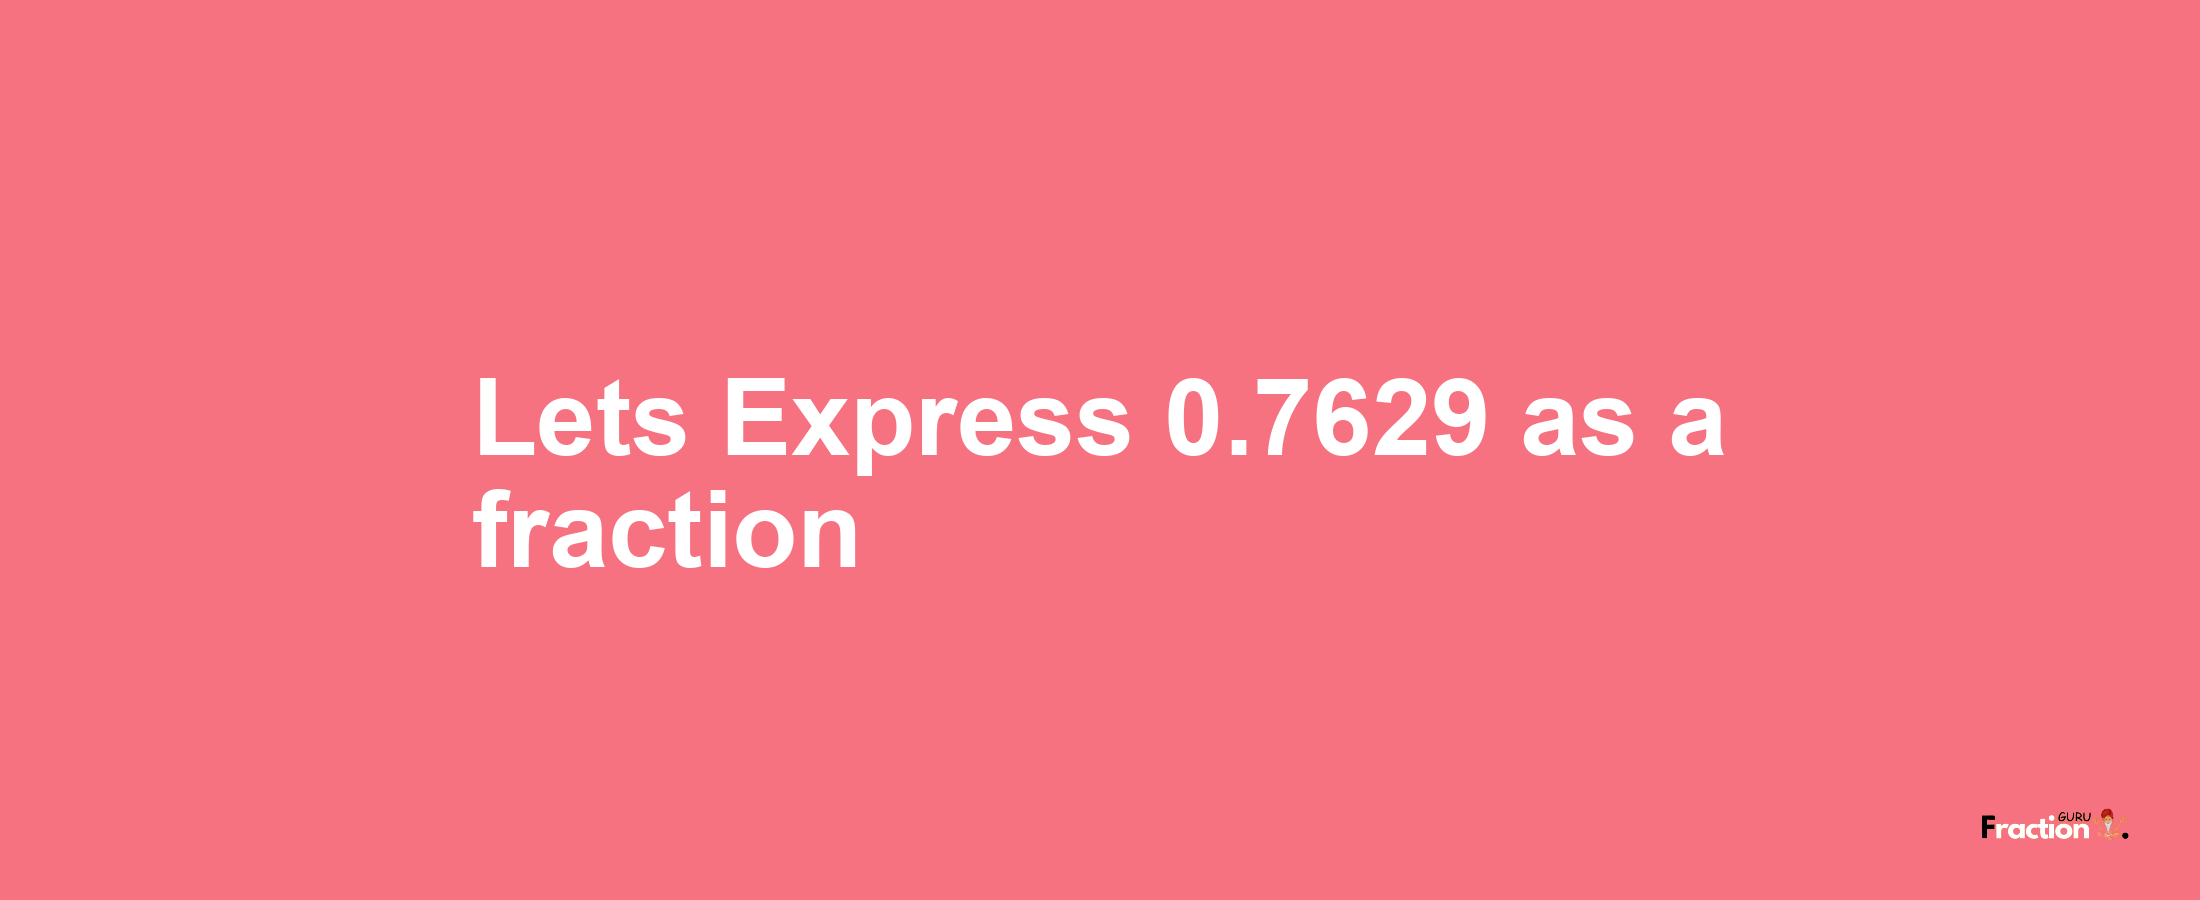 Lets Express 0.7629 as afraction